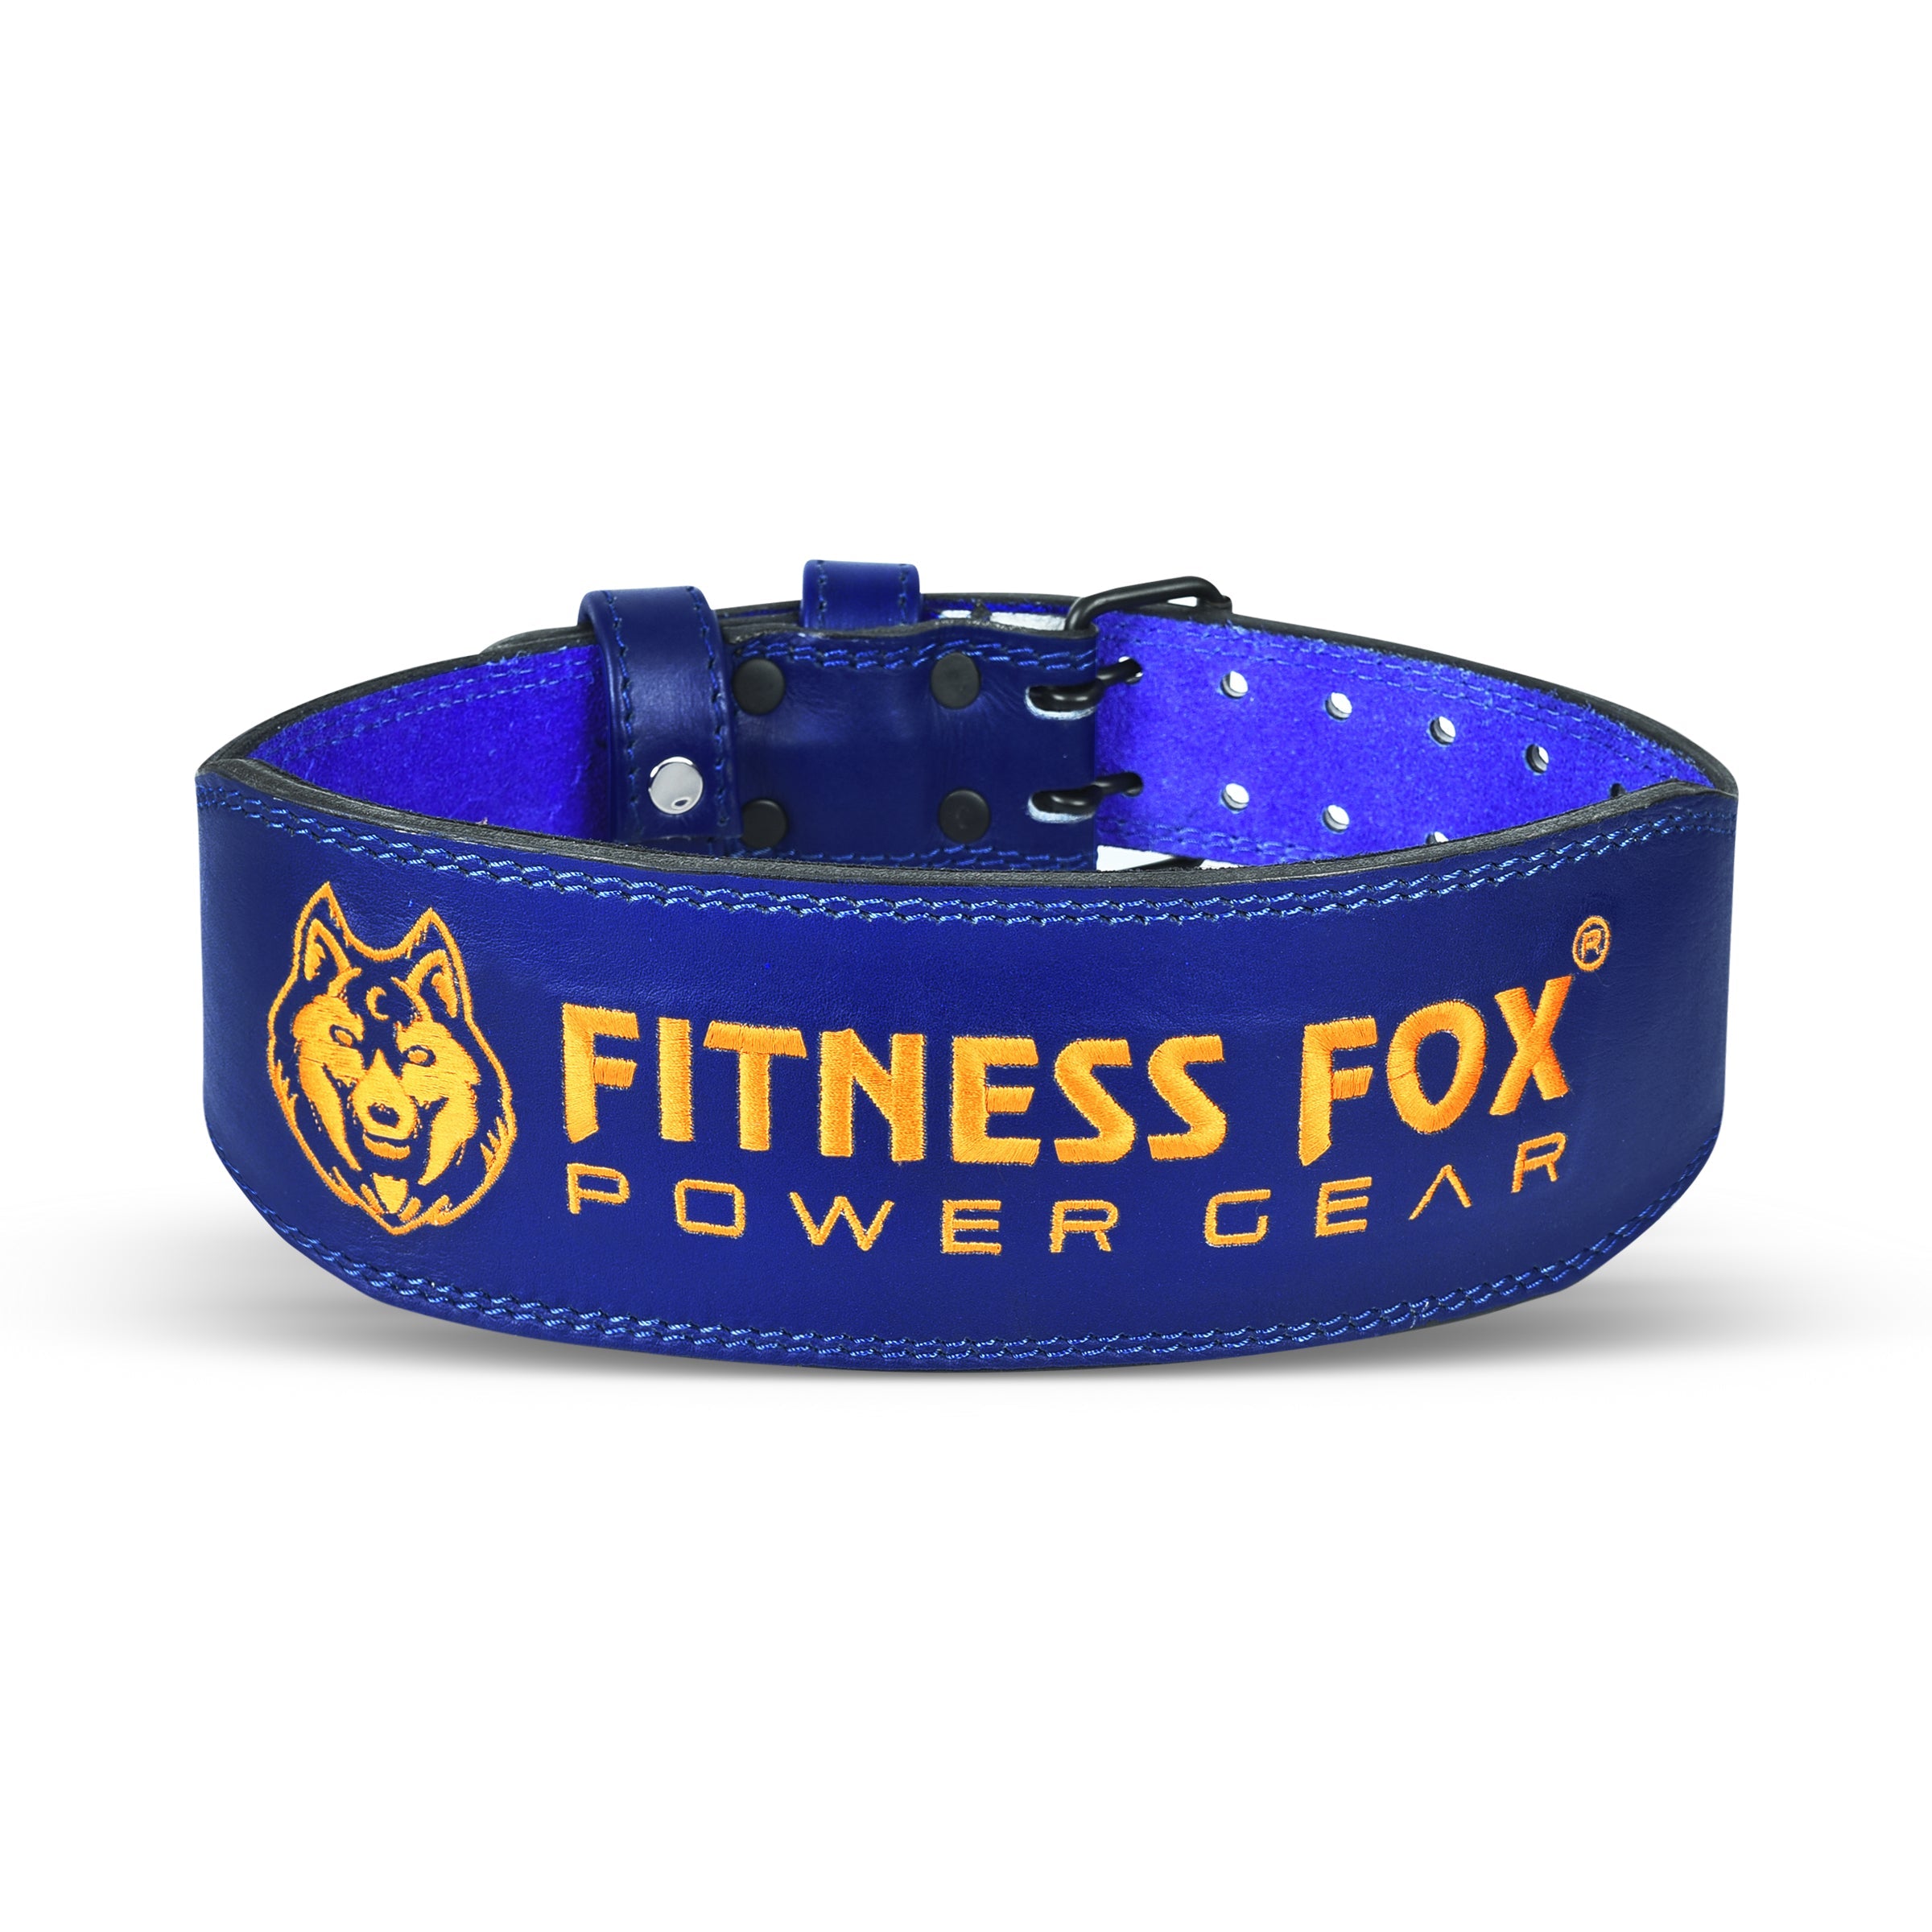 FitnessFox 4" Blue Weightlifting Leather Belt